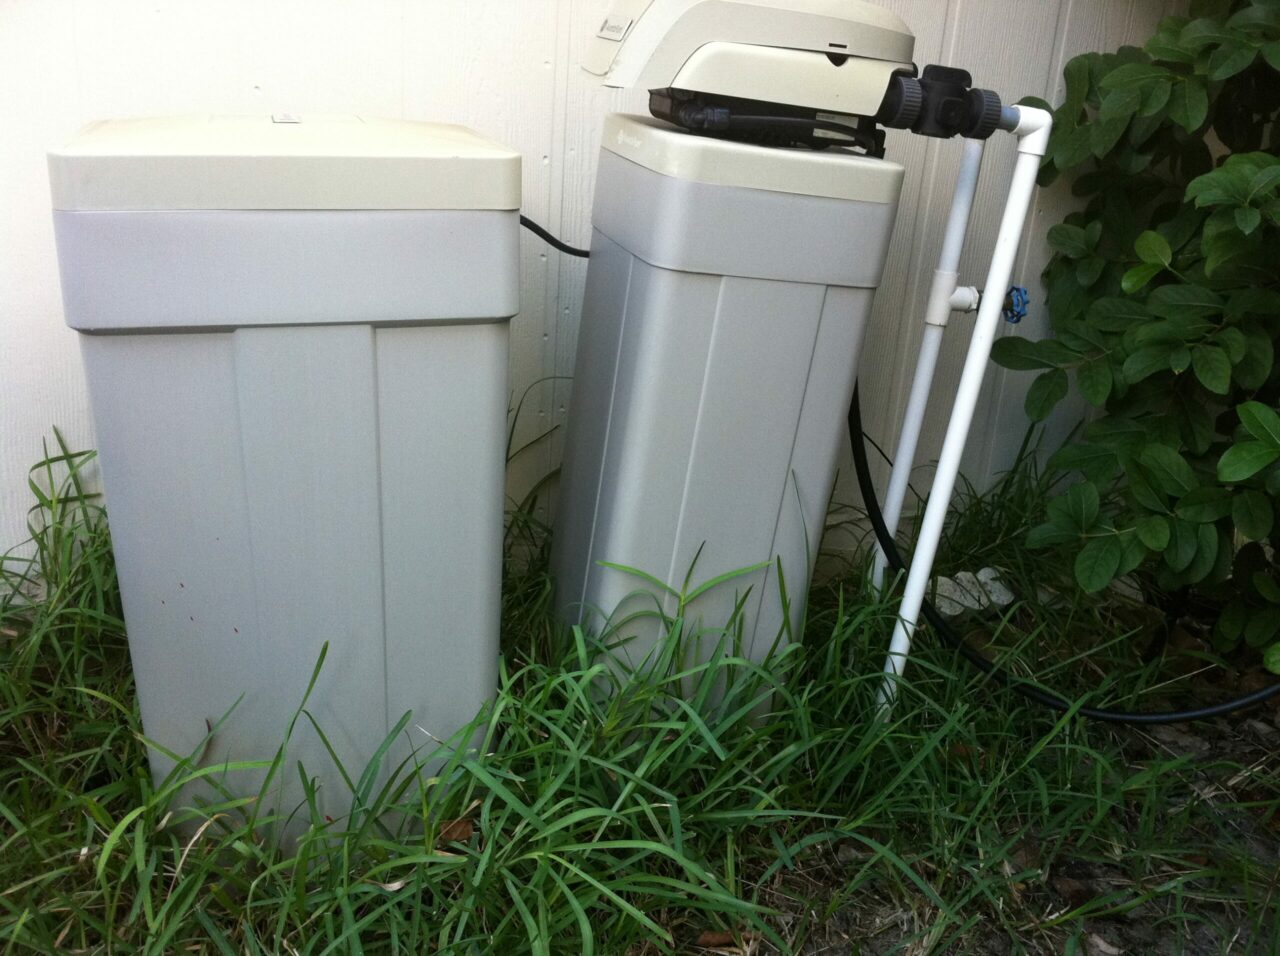 water-soteners-installed-scaled-1-1280x956.jpg